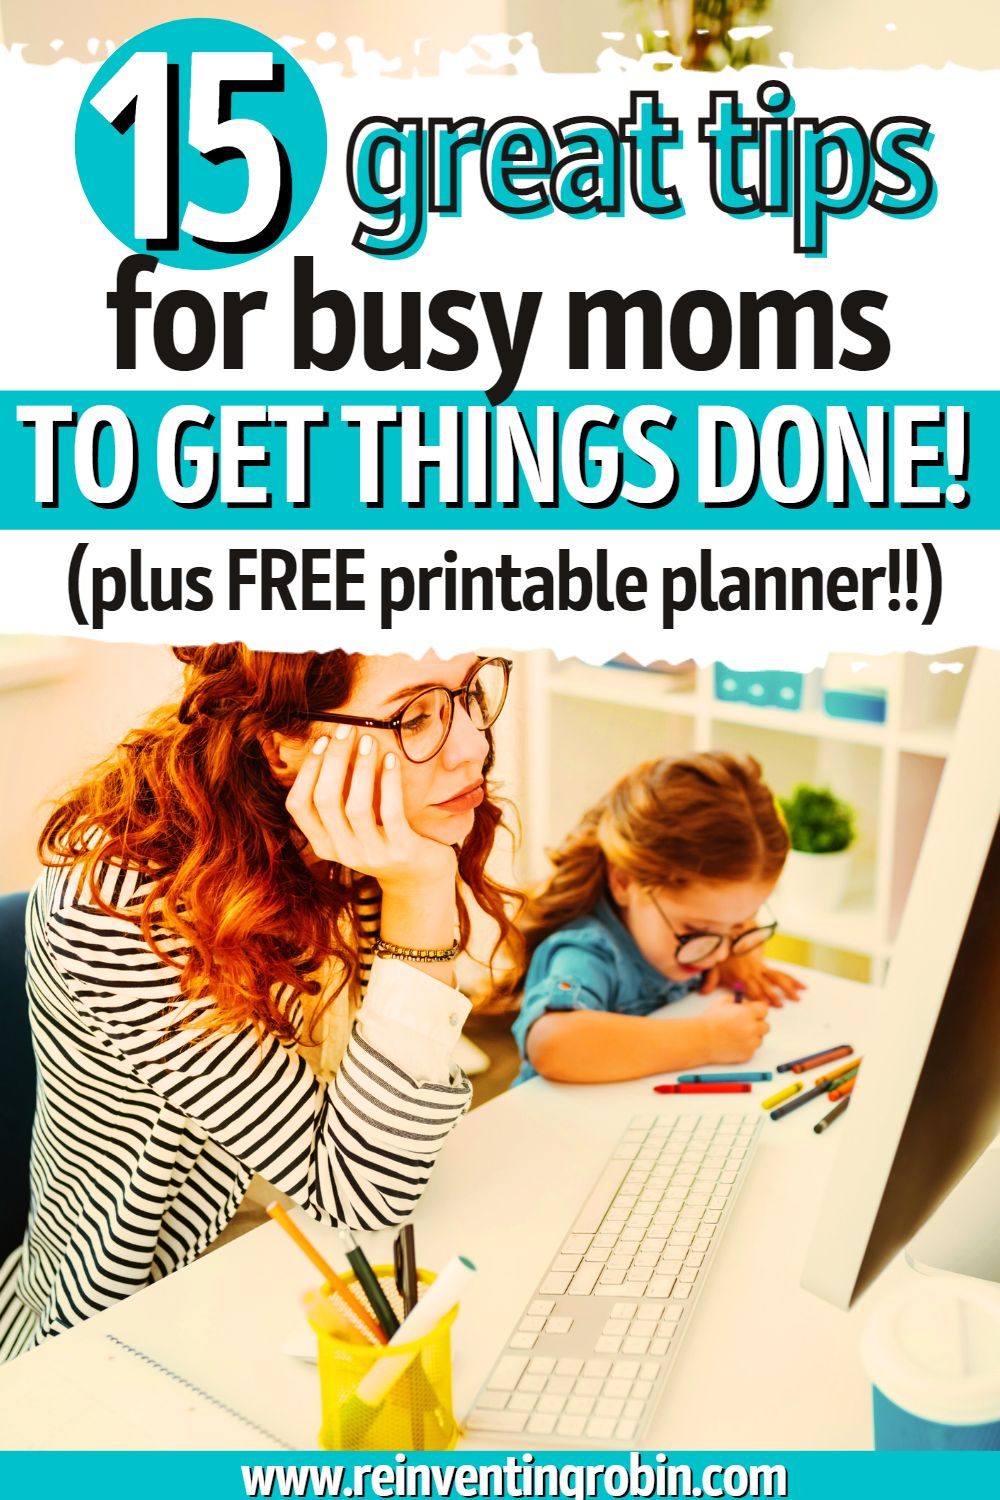 Picture shows a busy mom working on a laptop with a child in her lap. Text says 15 Great Tips for Busy Moms to Get Things Done Plus Free Printable Planner www.reinventingrobin.com